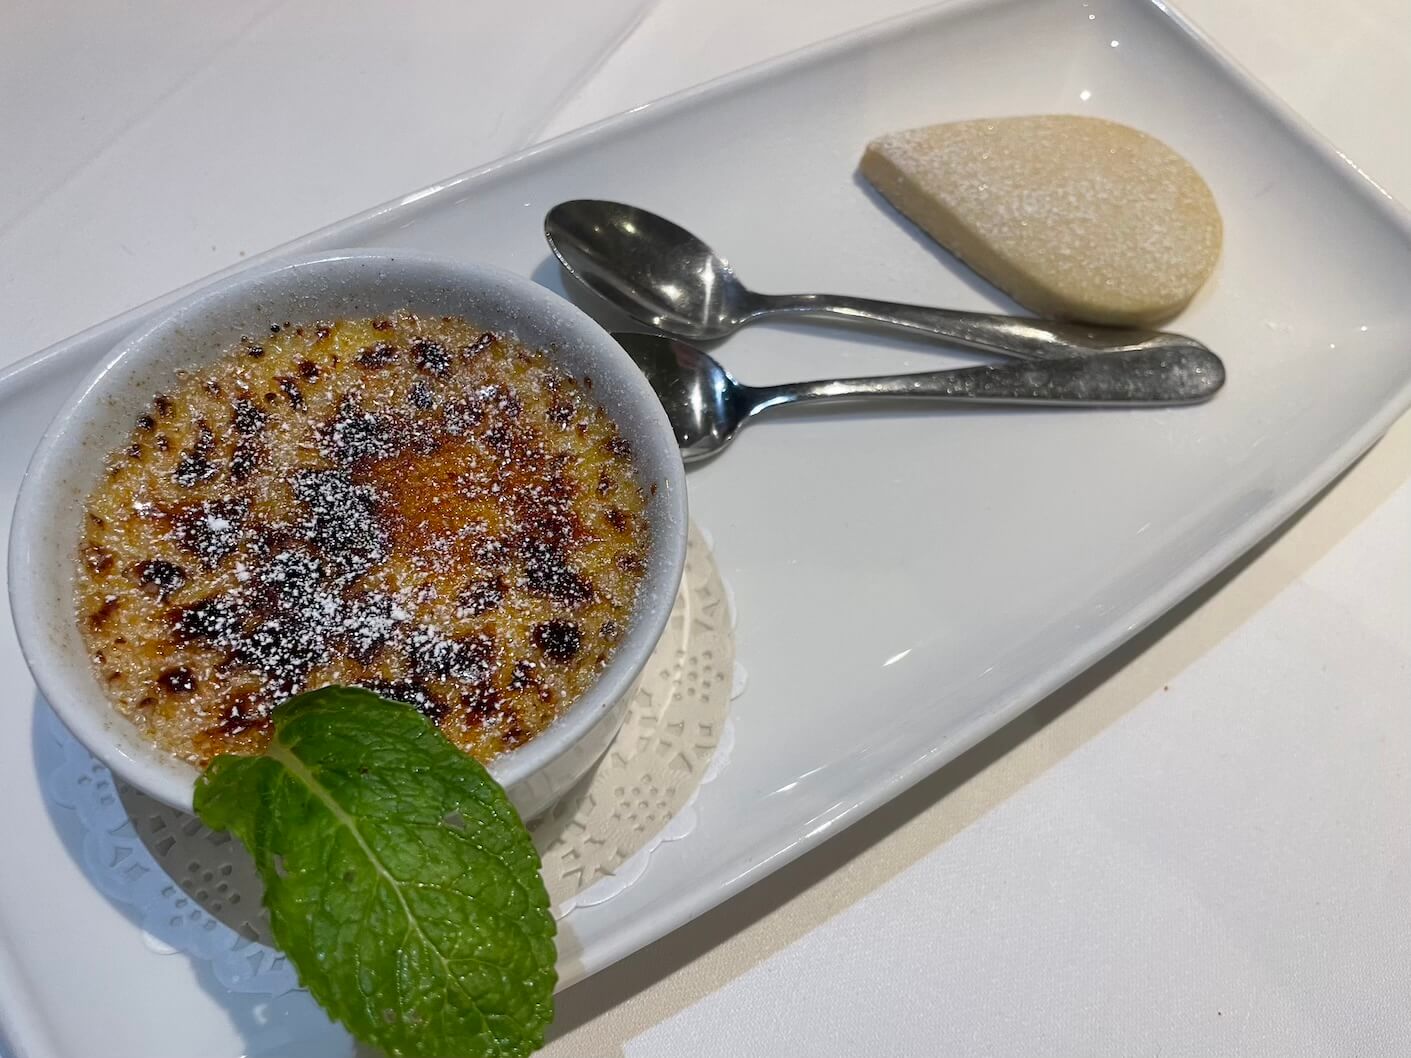 The excellent Creme Brûlée which is made onsite at Gibbon Bridge